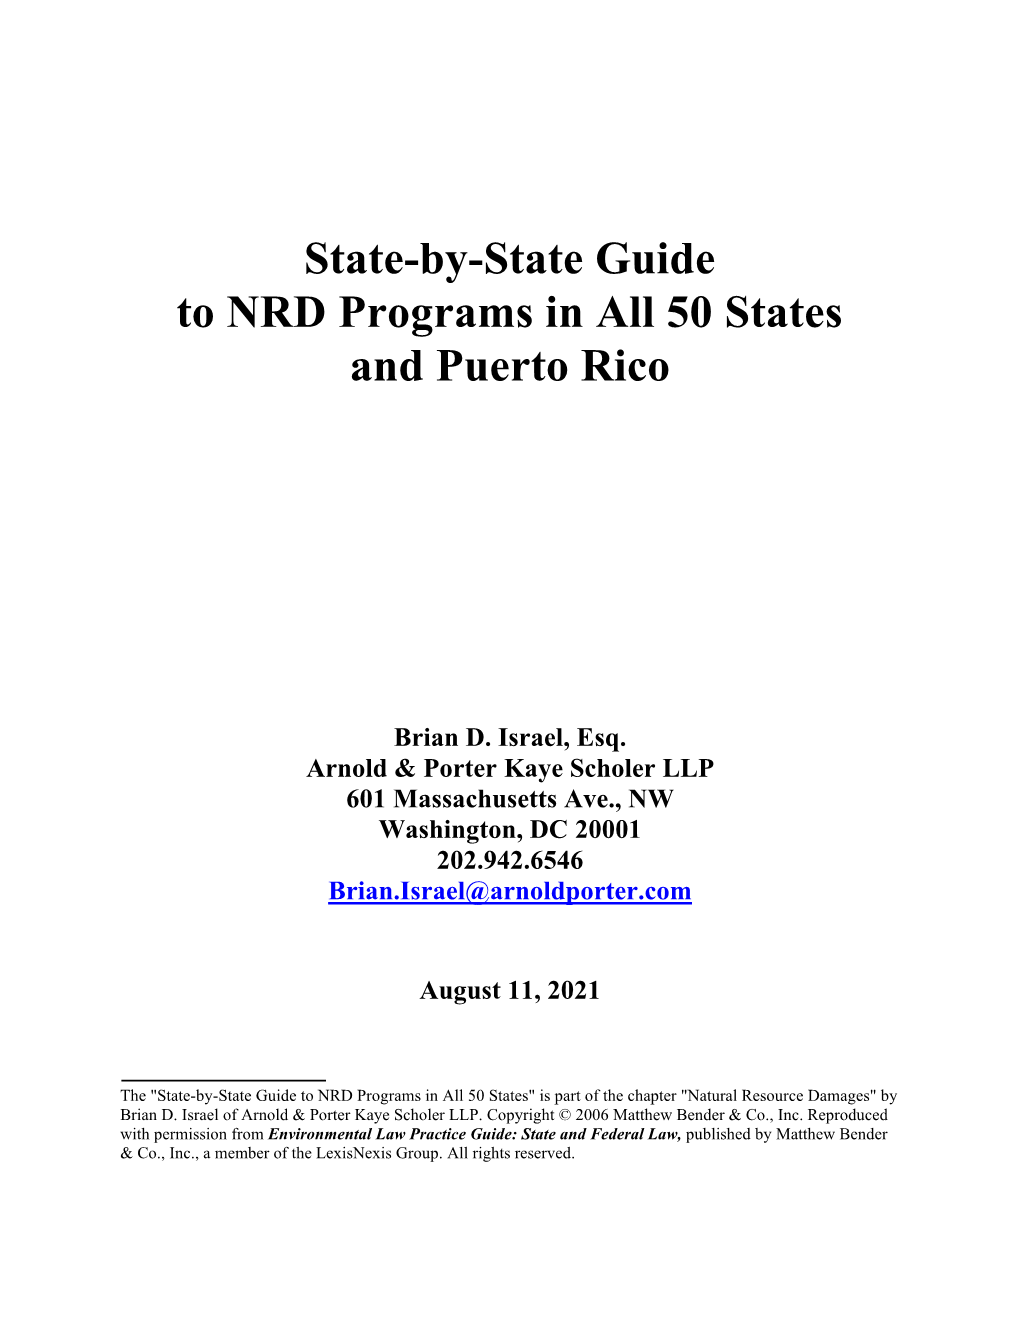 August 12, 2021 State-By-State Guide to NRD Programs in All 50 States